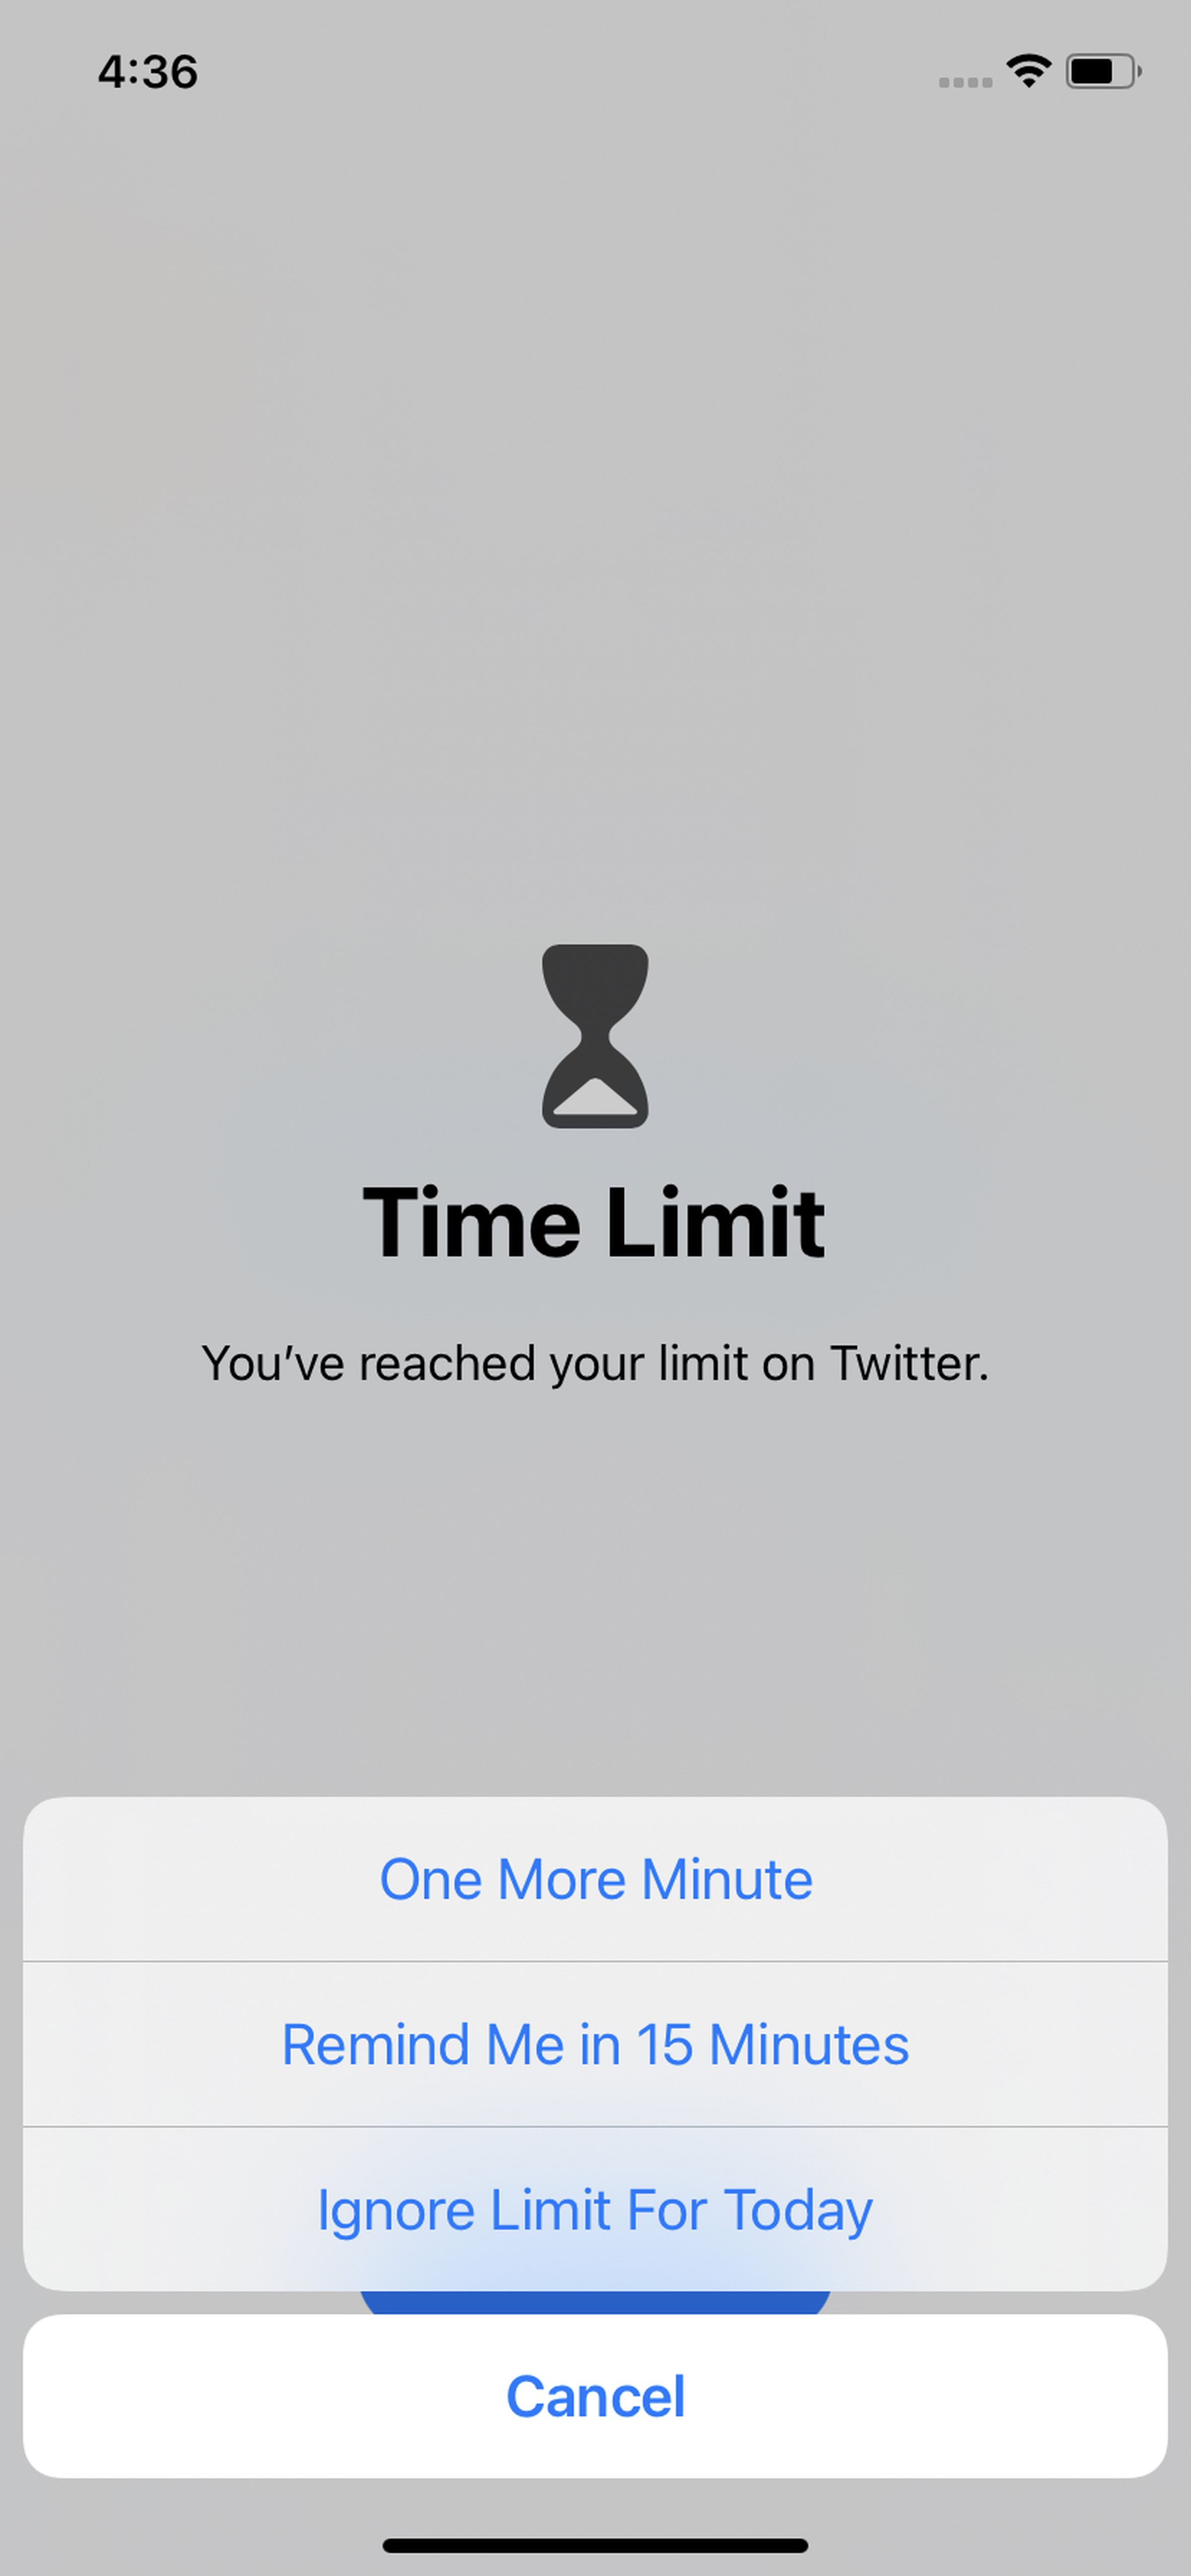 When you hit your time limit, you can ask for more time, or ignore it altogether.